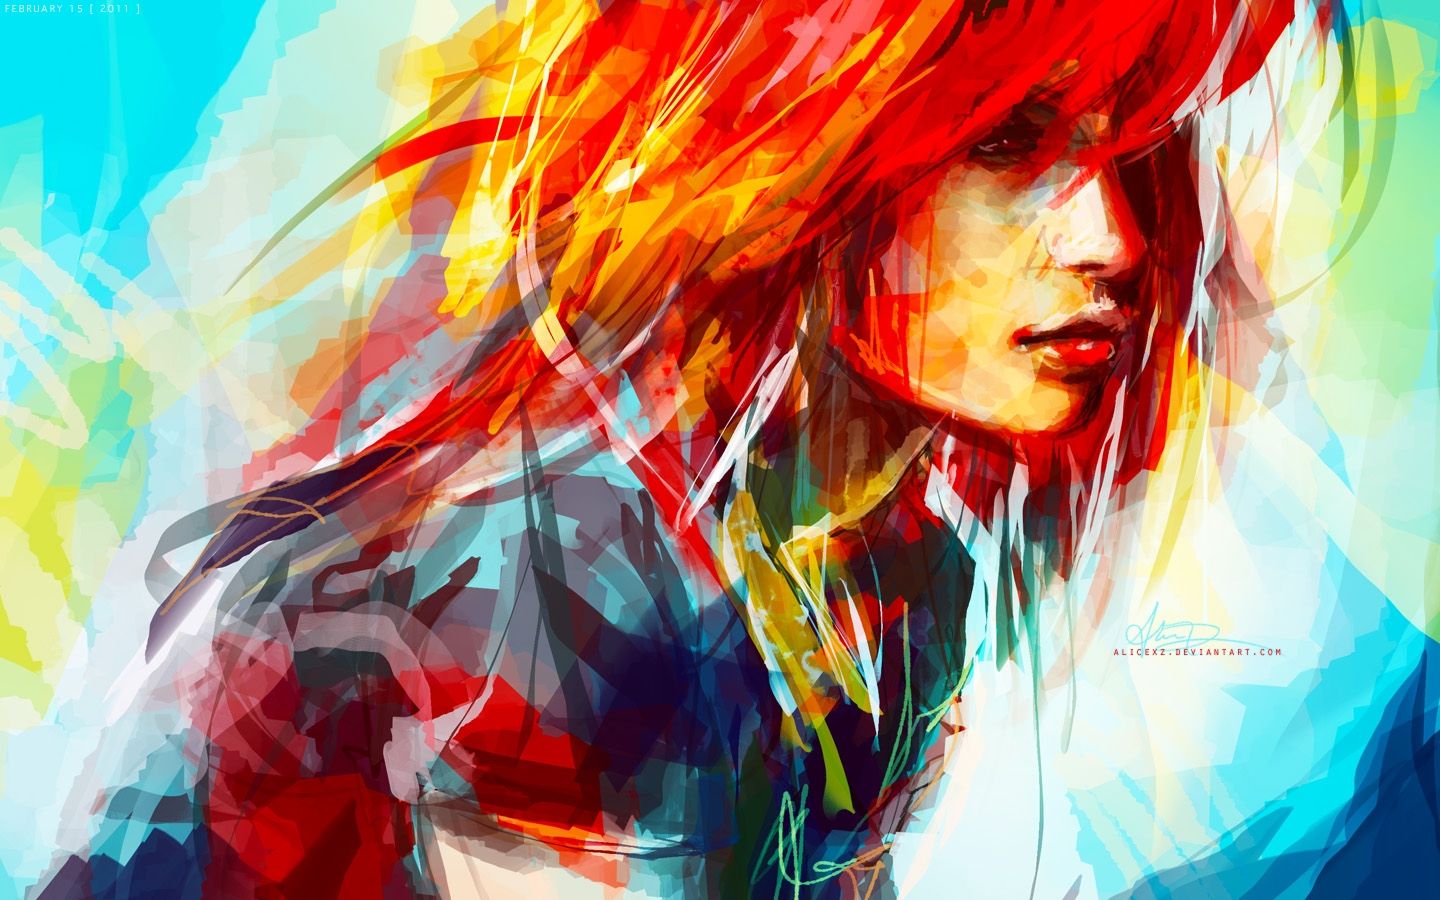 Download Wallpaper, Download 1024x1024 hayley williams women abstract paintings indoors artwork faces alice x zhang 1440x900 Wallpaper –Free Wallpaper Download